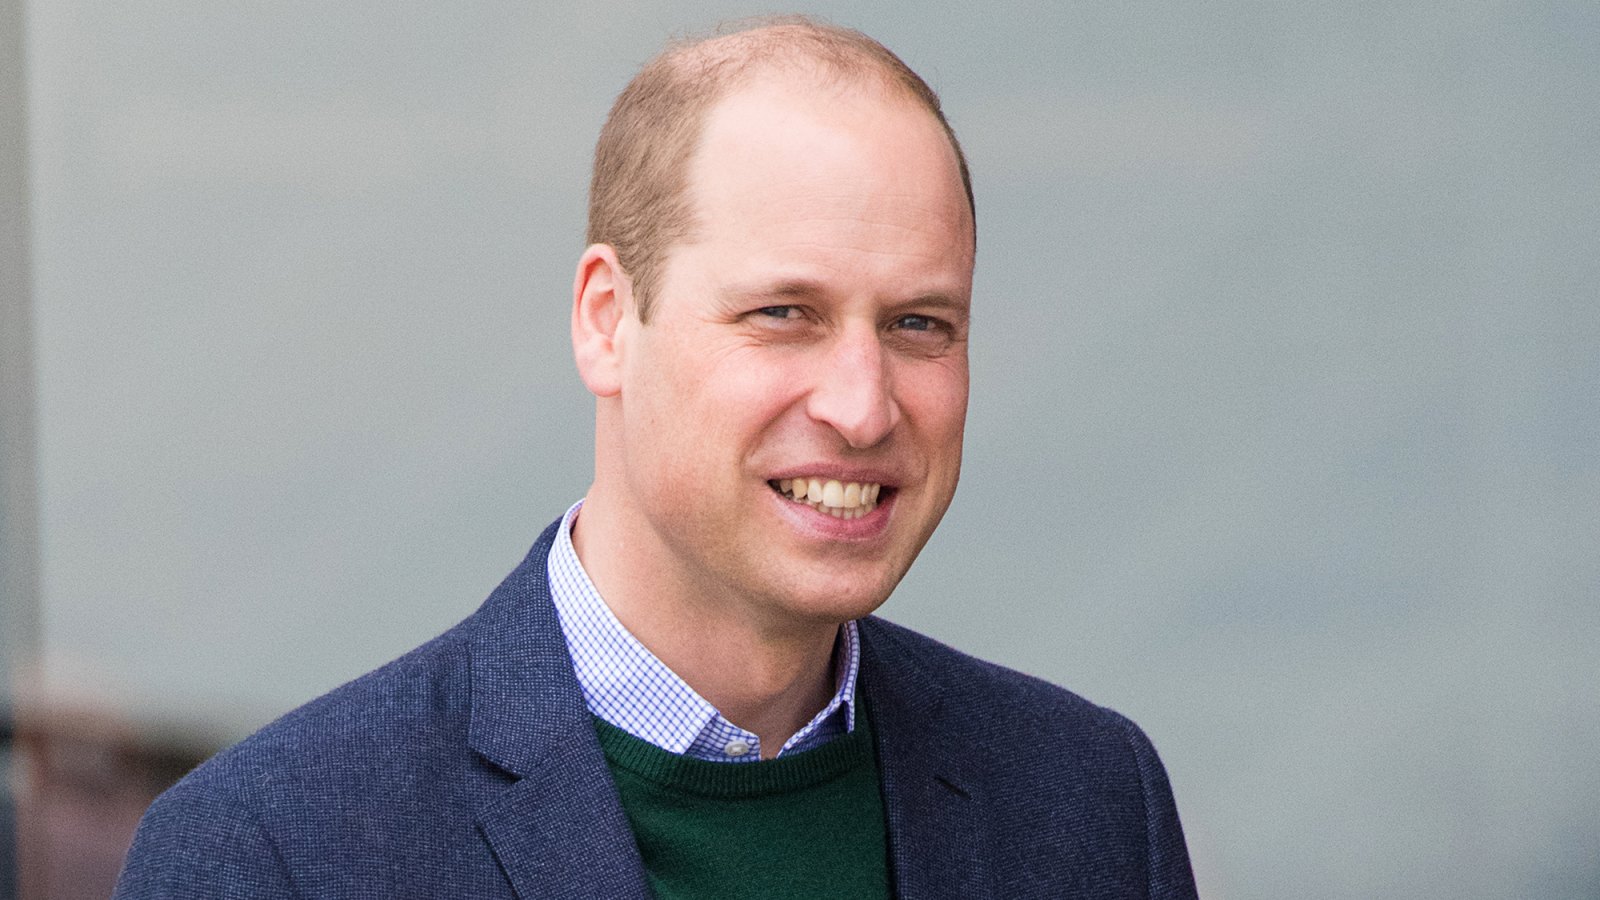 Prince William Sent His Favorite Soccer Team 'Support' After Game Win Amid Queen Elizabeth II’s Death